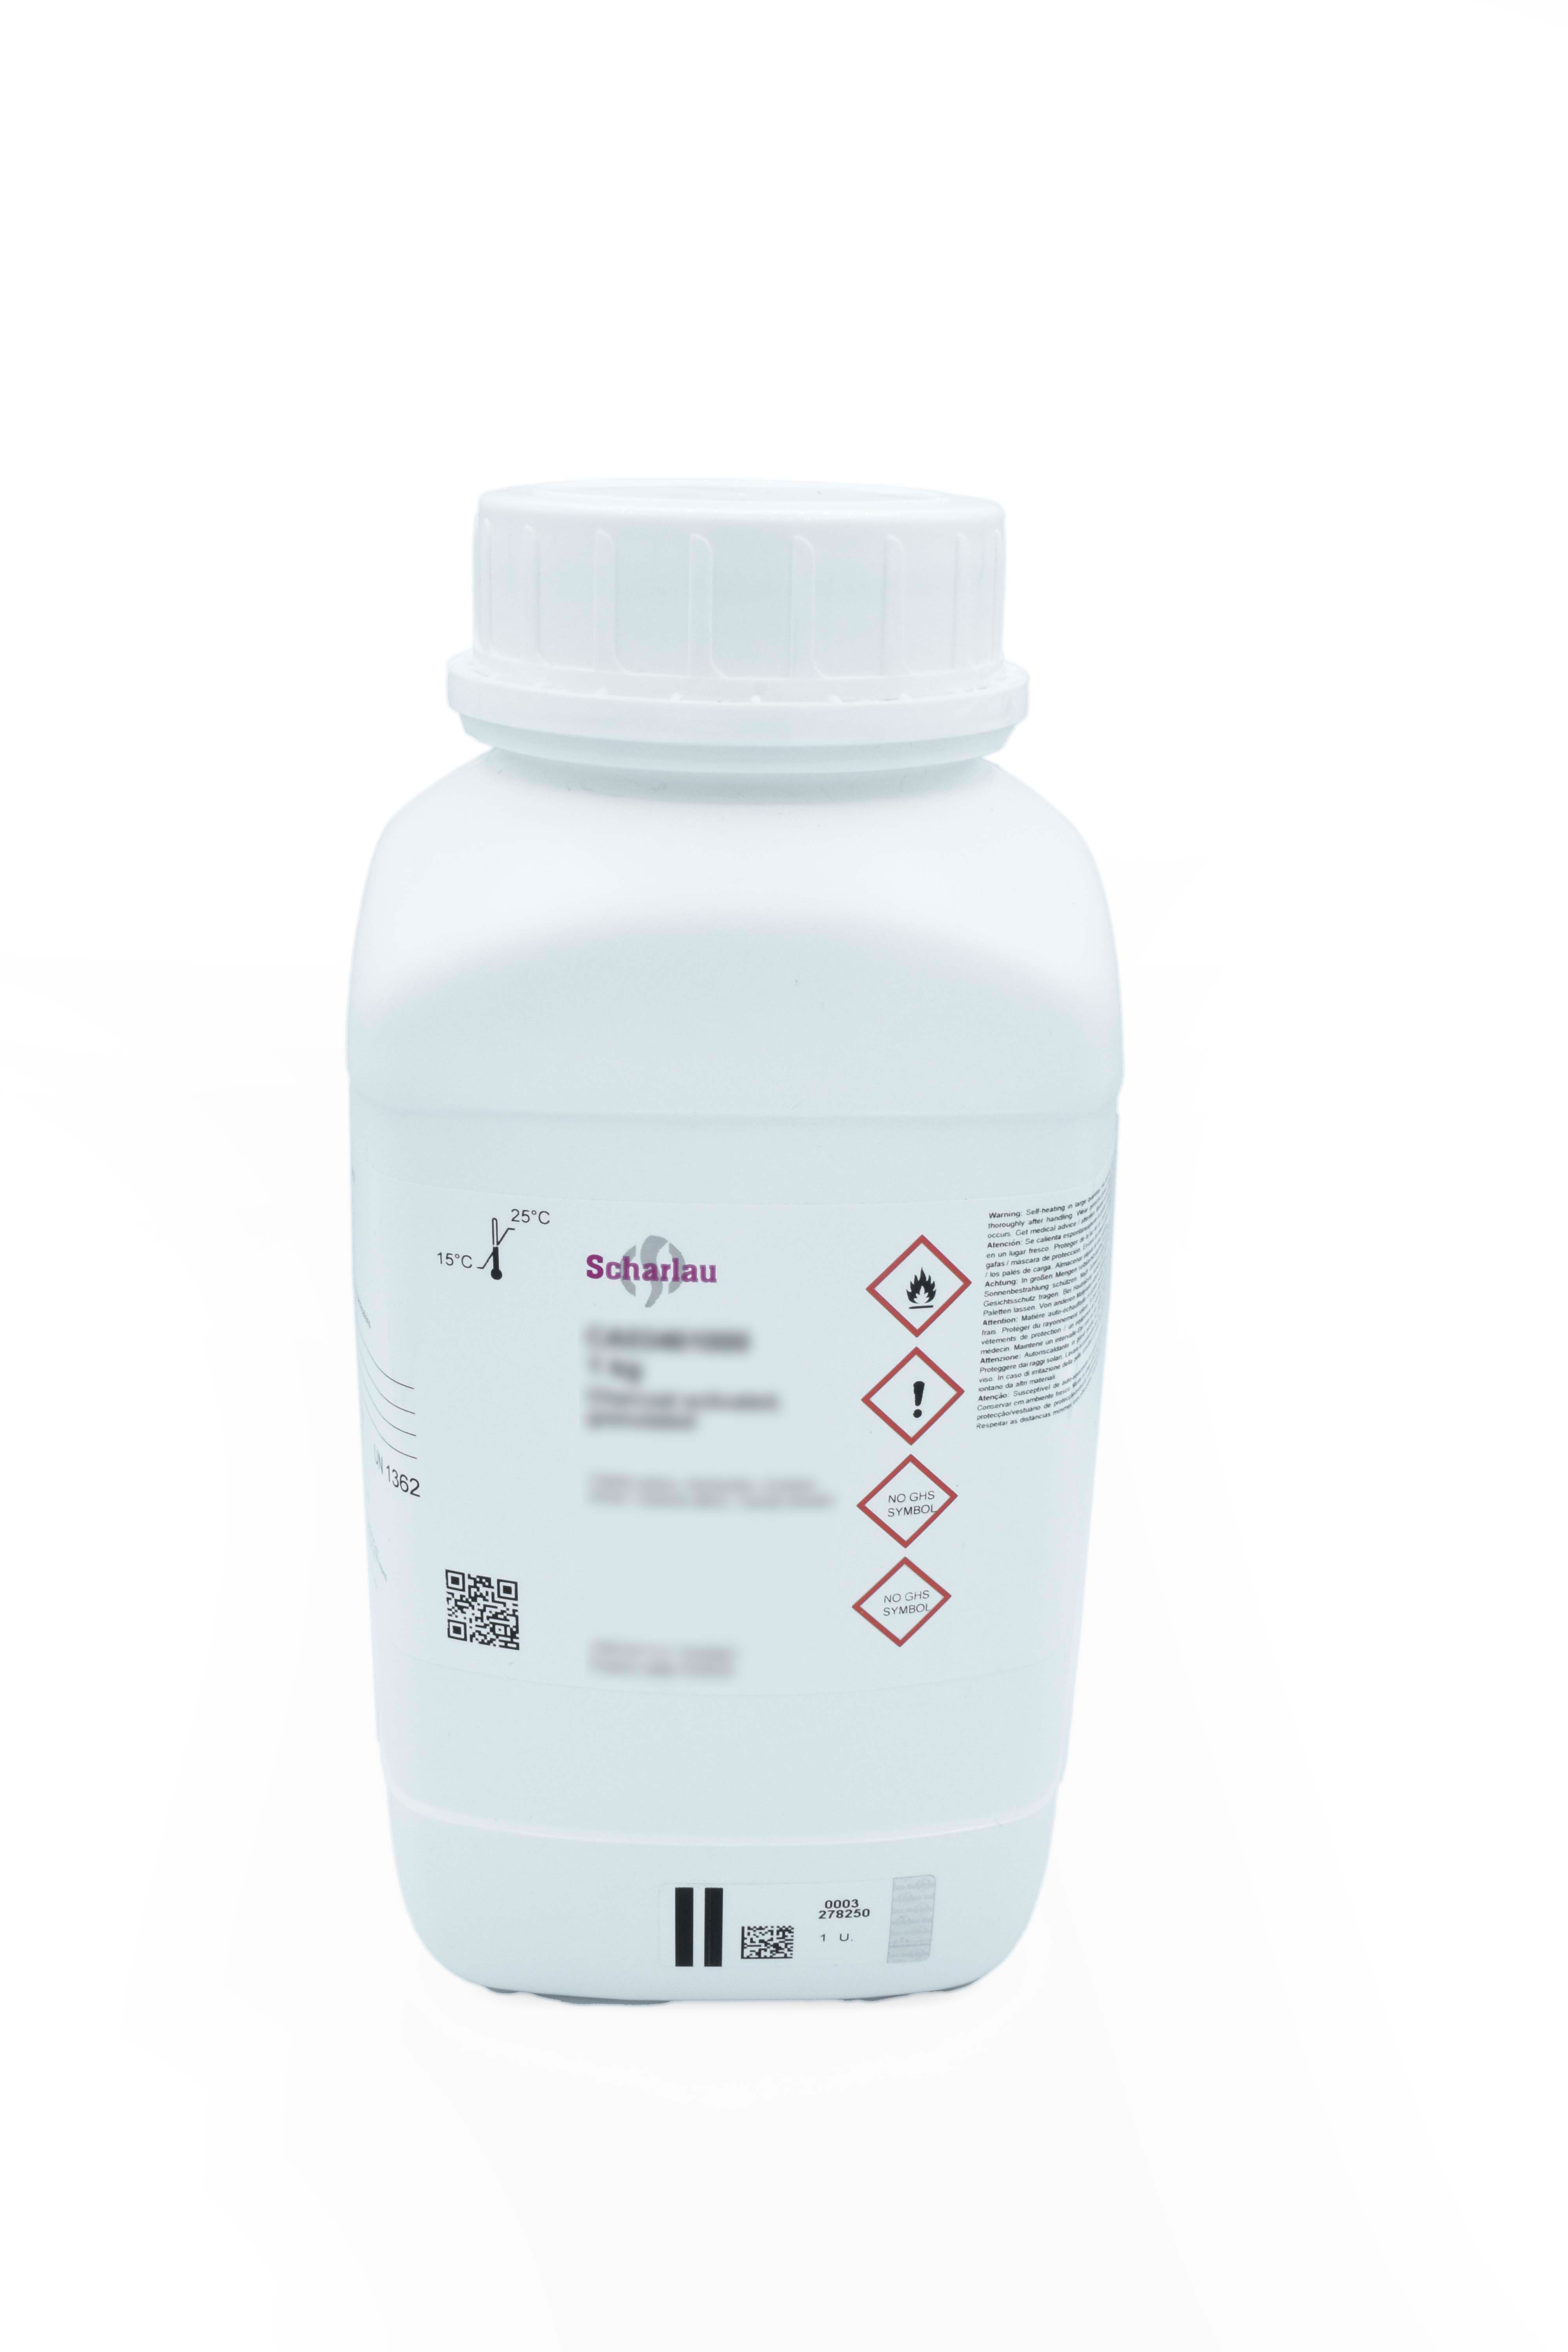 di-Potassium hydrogen phosphate anhydrous, for analysis, ExpertQ®, ACS, Reag. Ph Eur